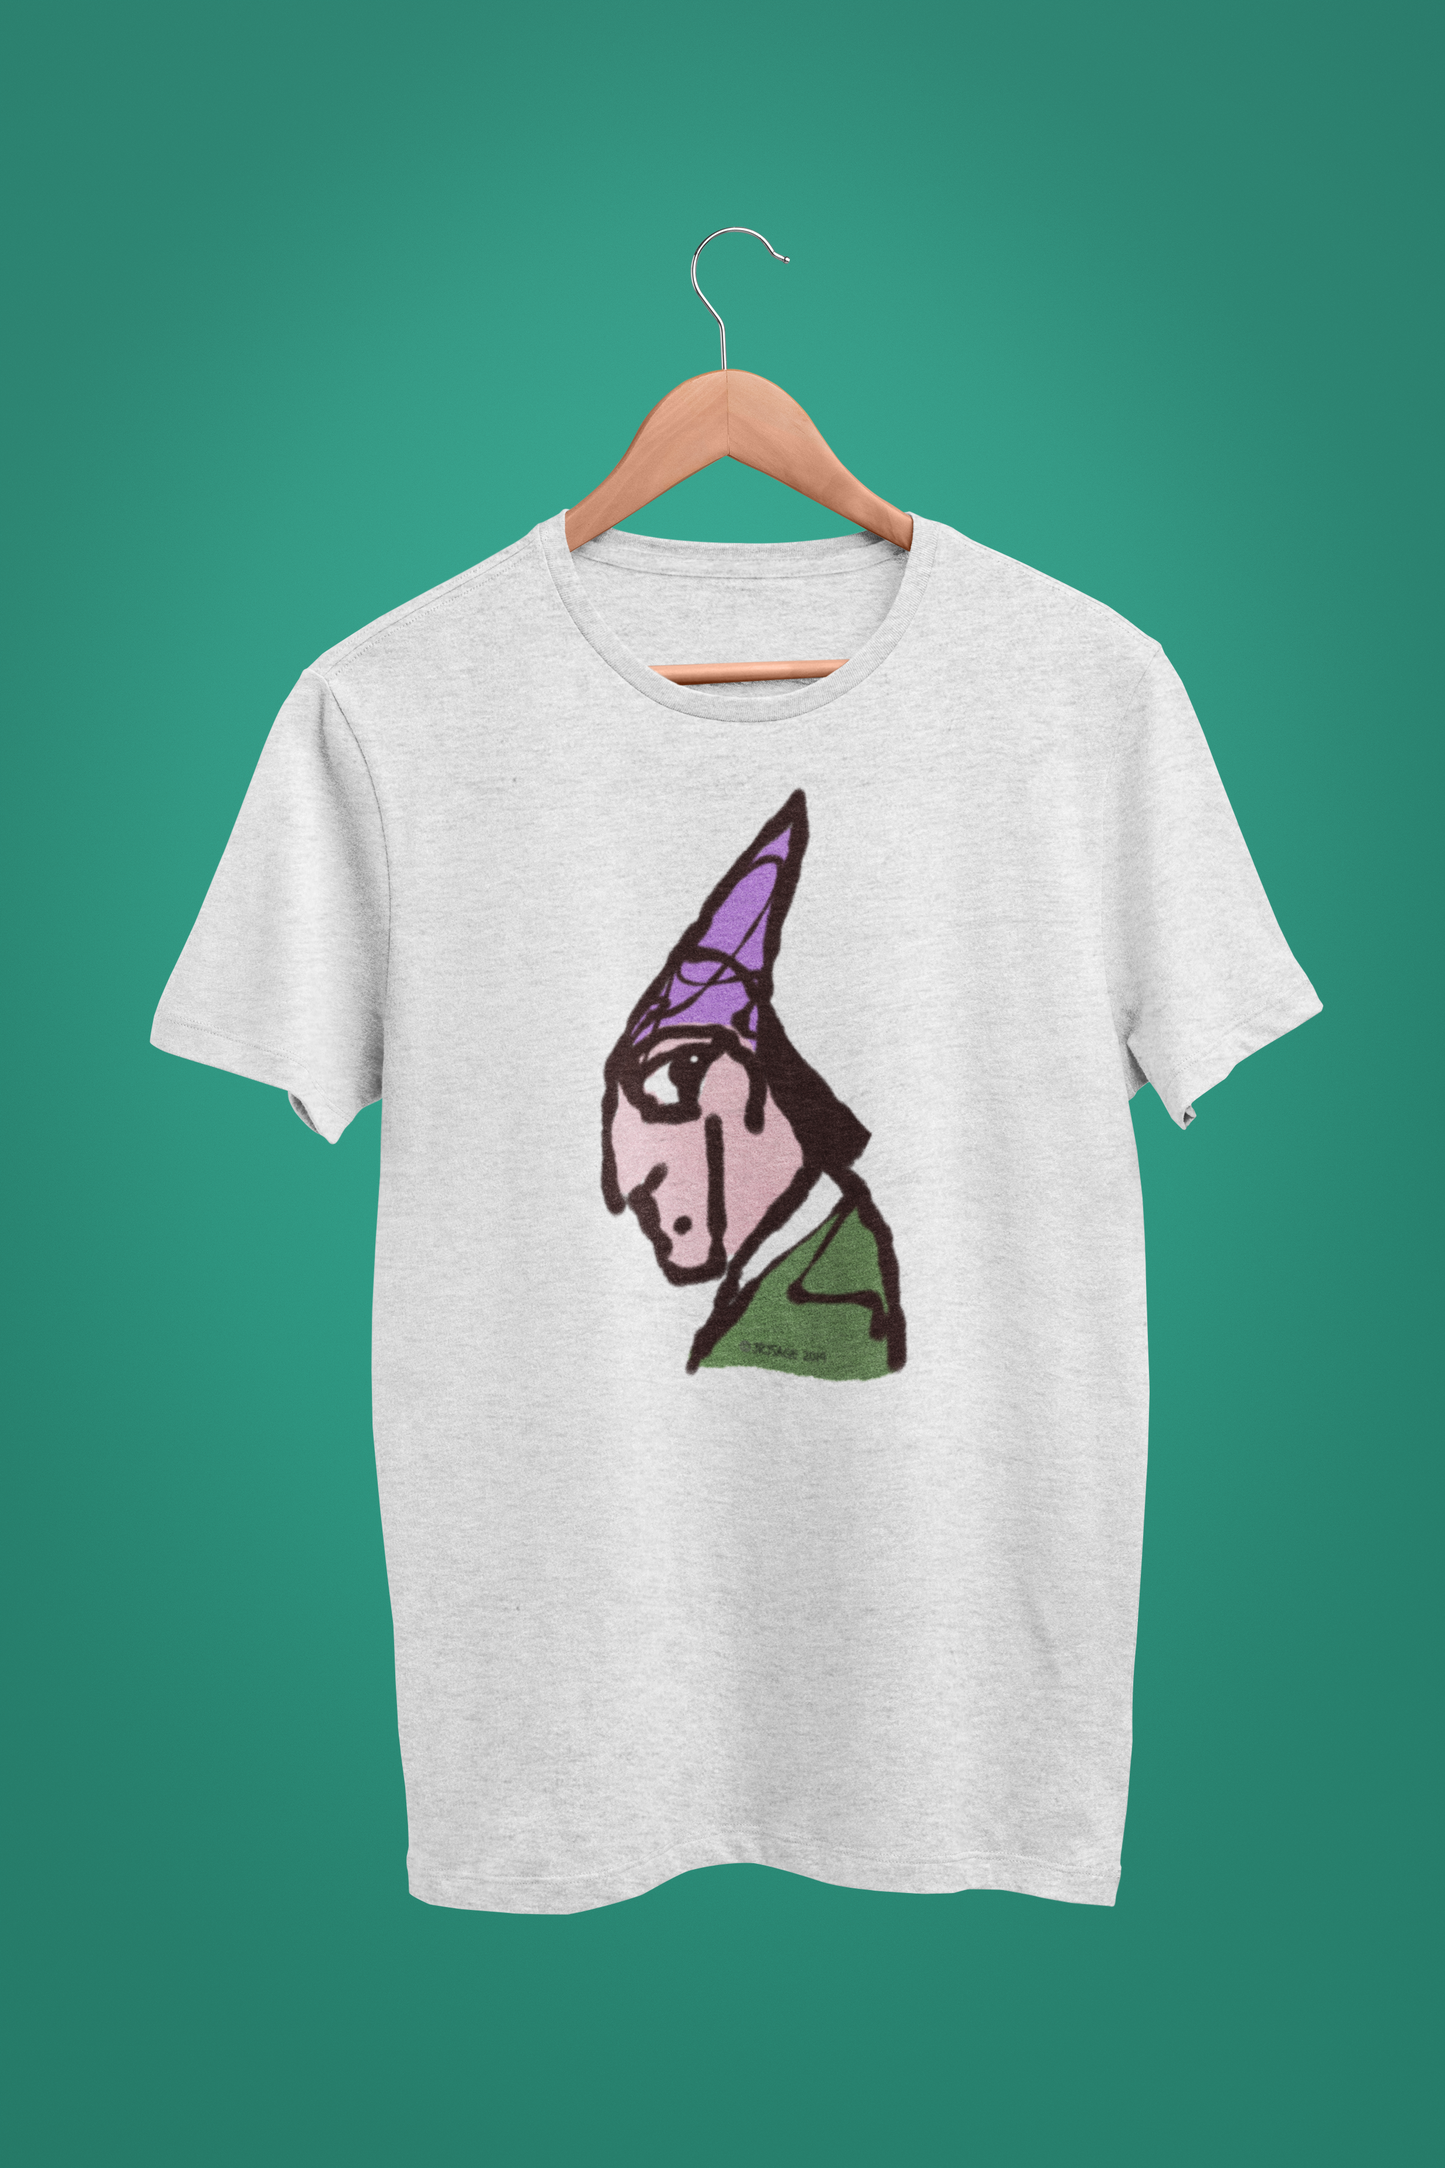 Wizard T-shirt - Illustrated magical Wizard t-shirts on cream heather grey vegan cotton by Hector and Bone